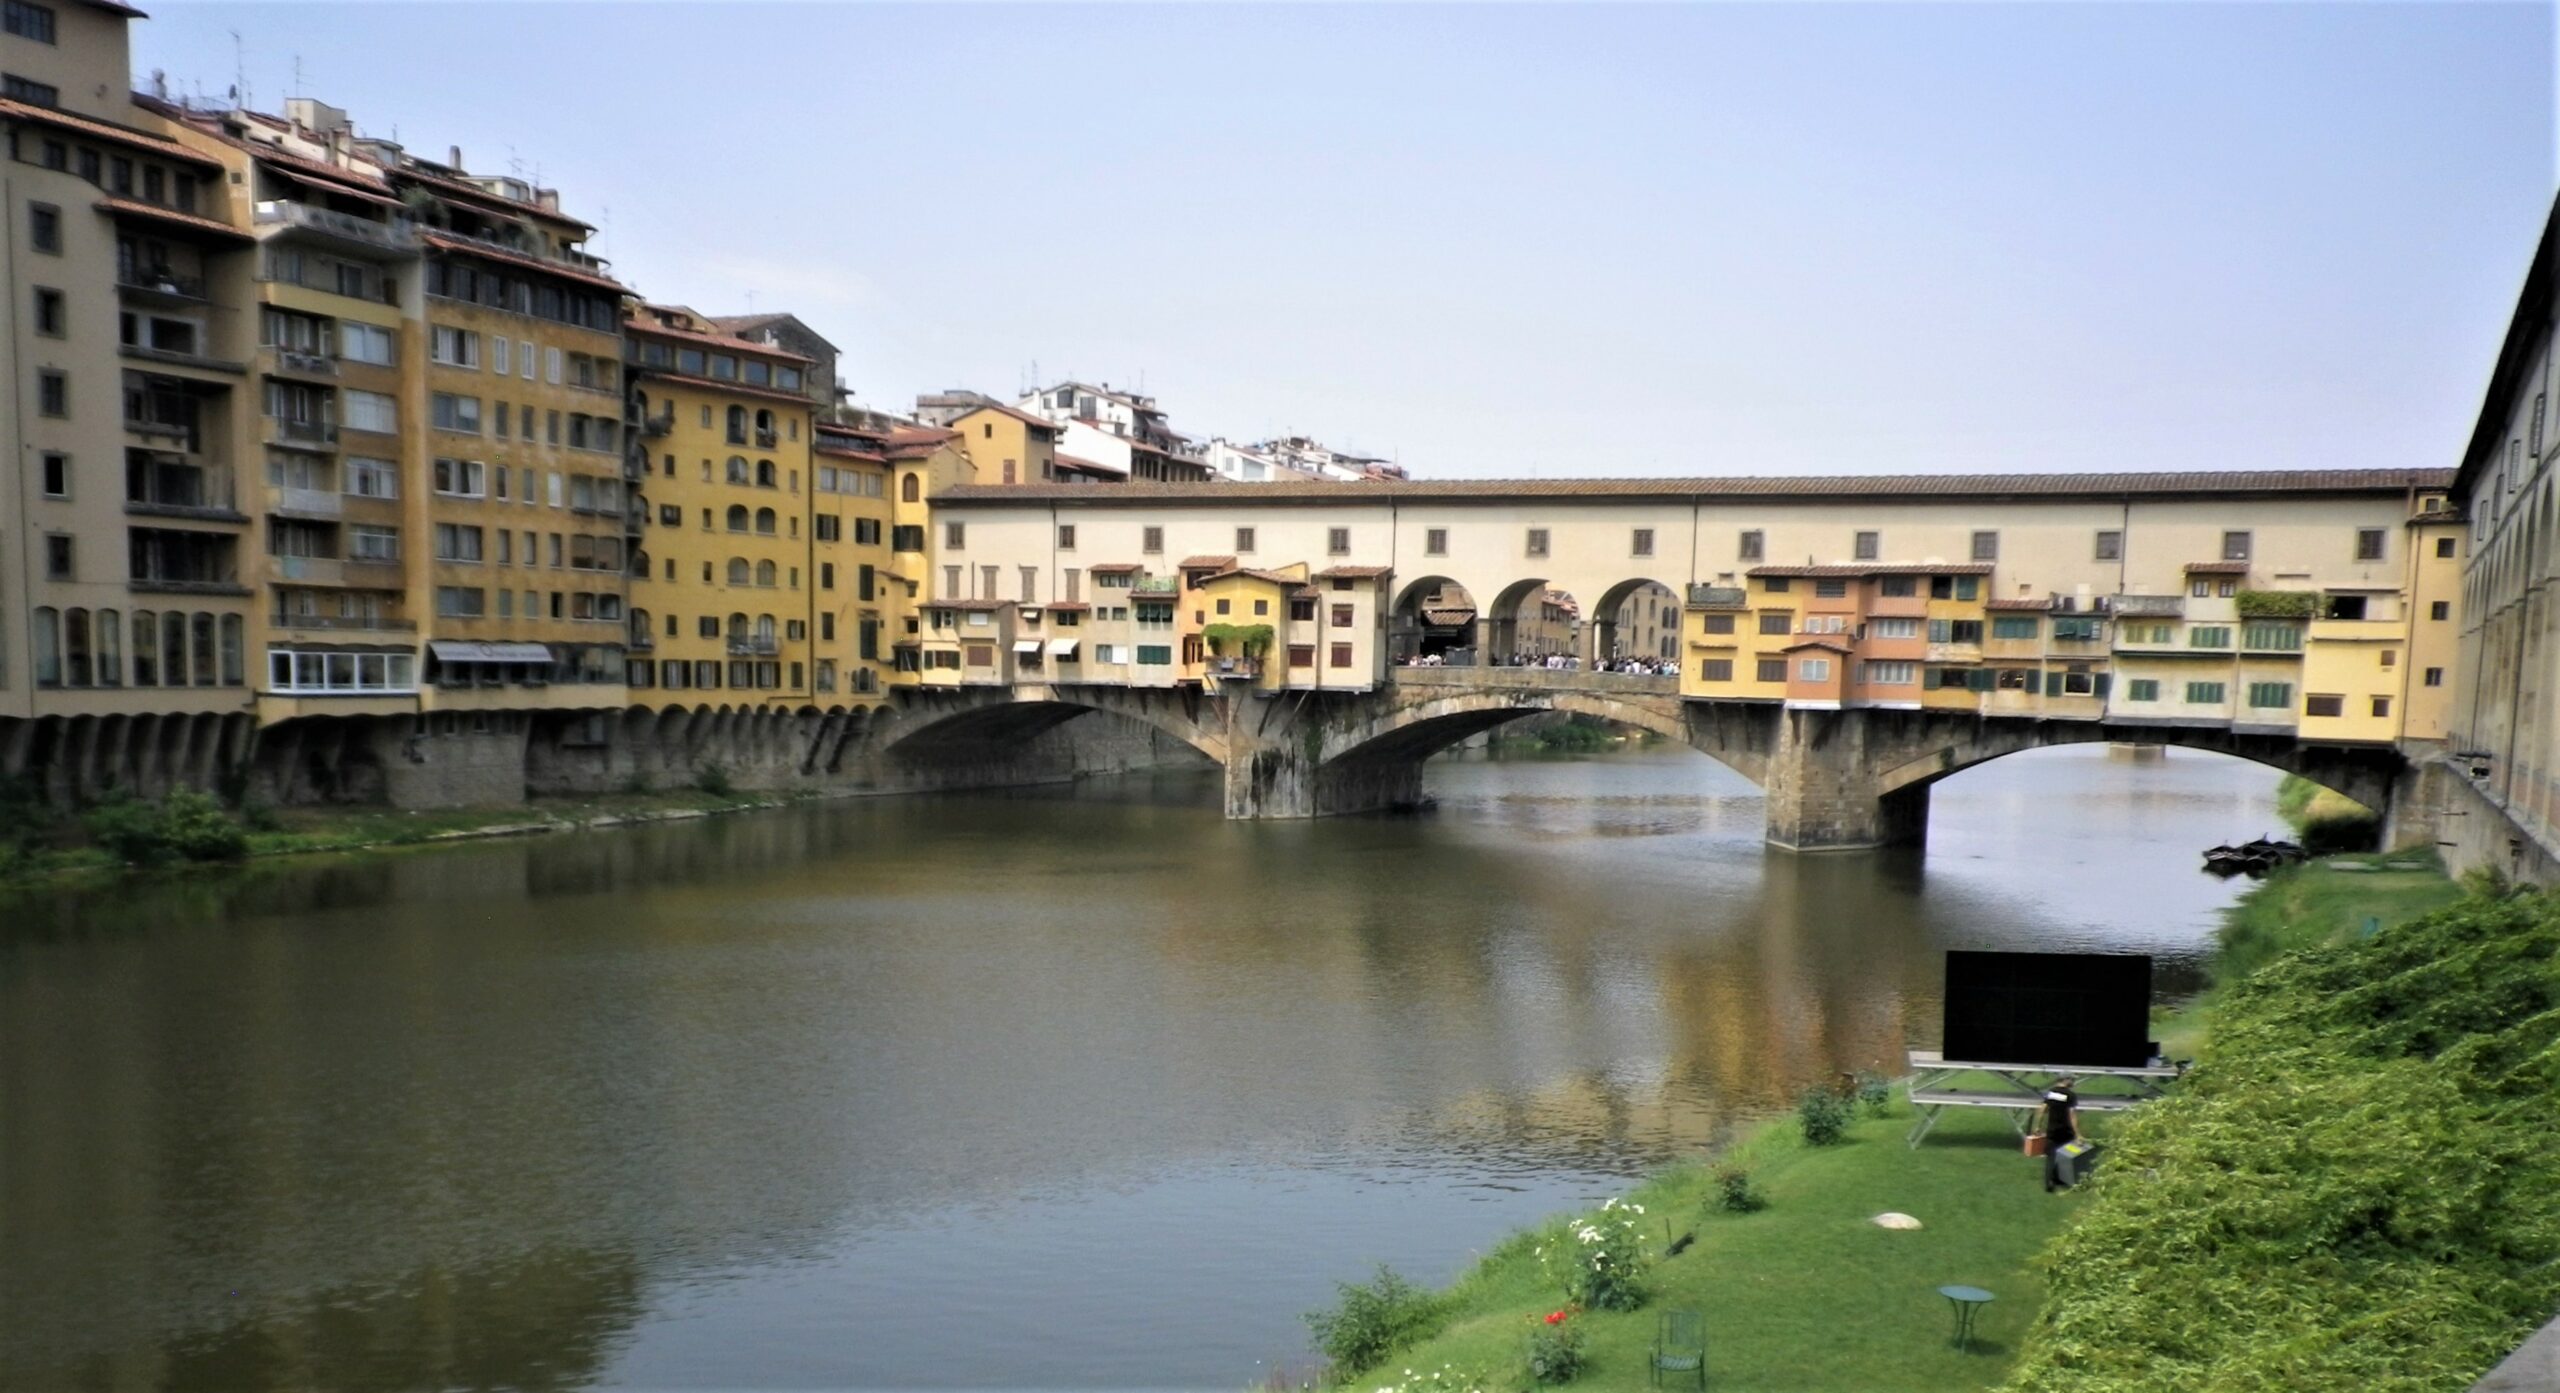 The Ponte Vecchio bridge, built in the 14th century, in Florence, Italy. Photo by Susan J. Young. 